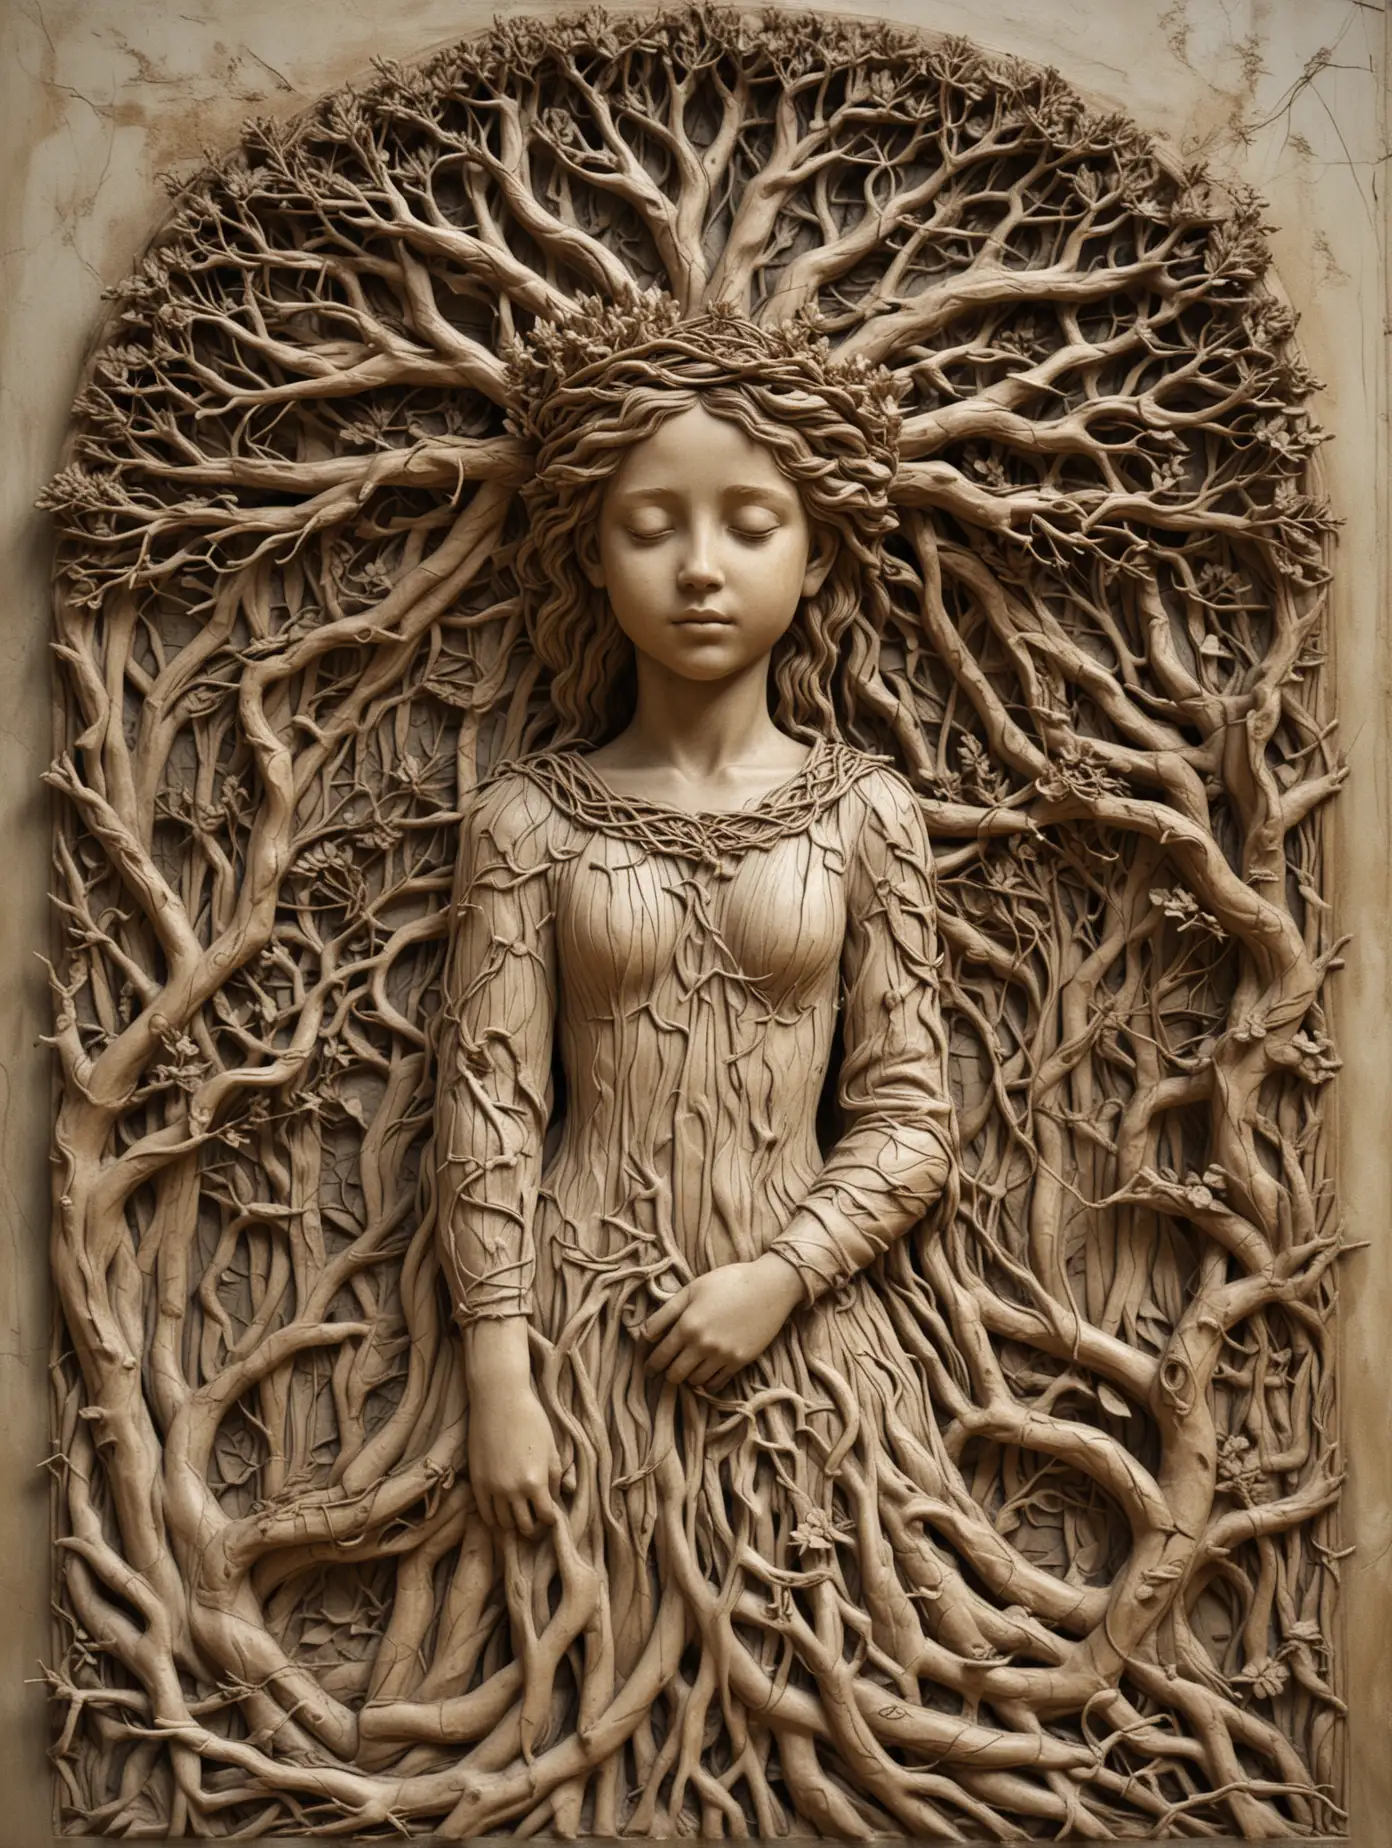 Girl-Crowned-by-Interweaving-Tree-Branches-Ethereal-BasRelief-Art